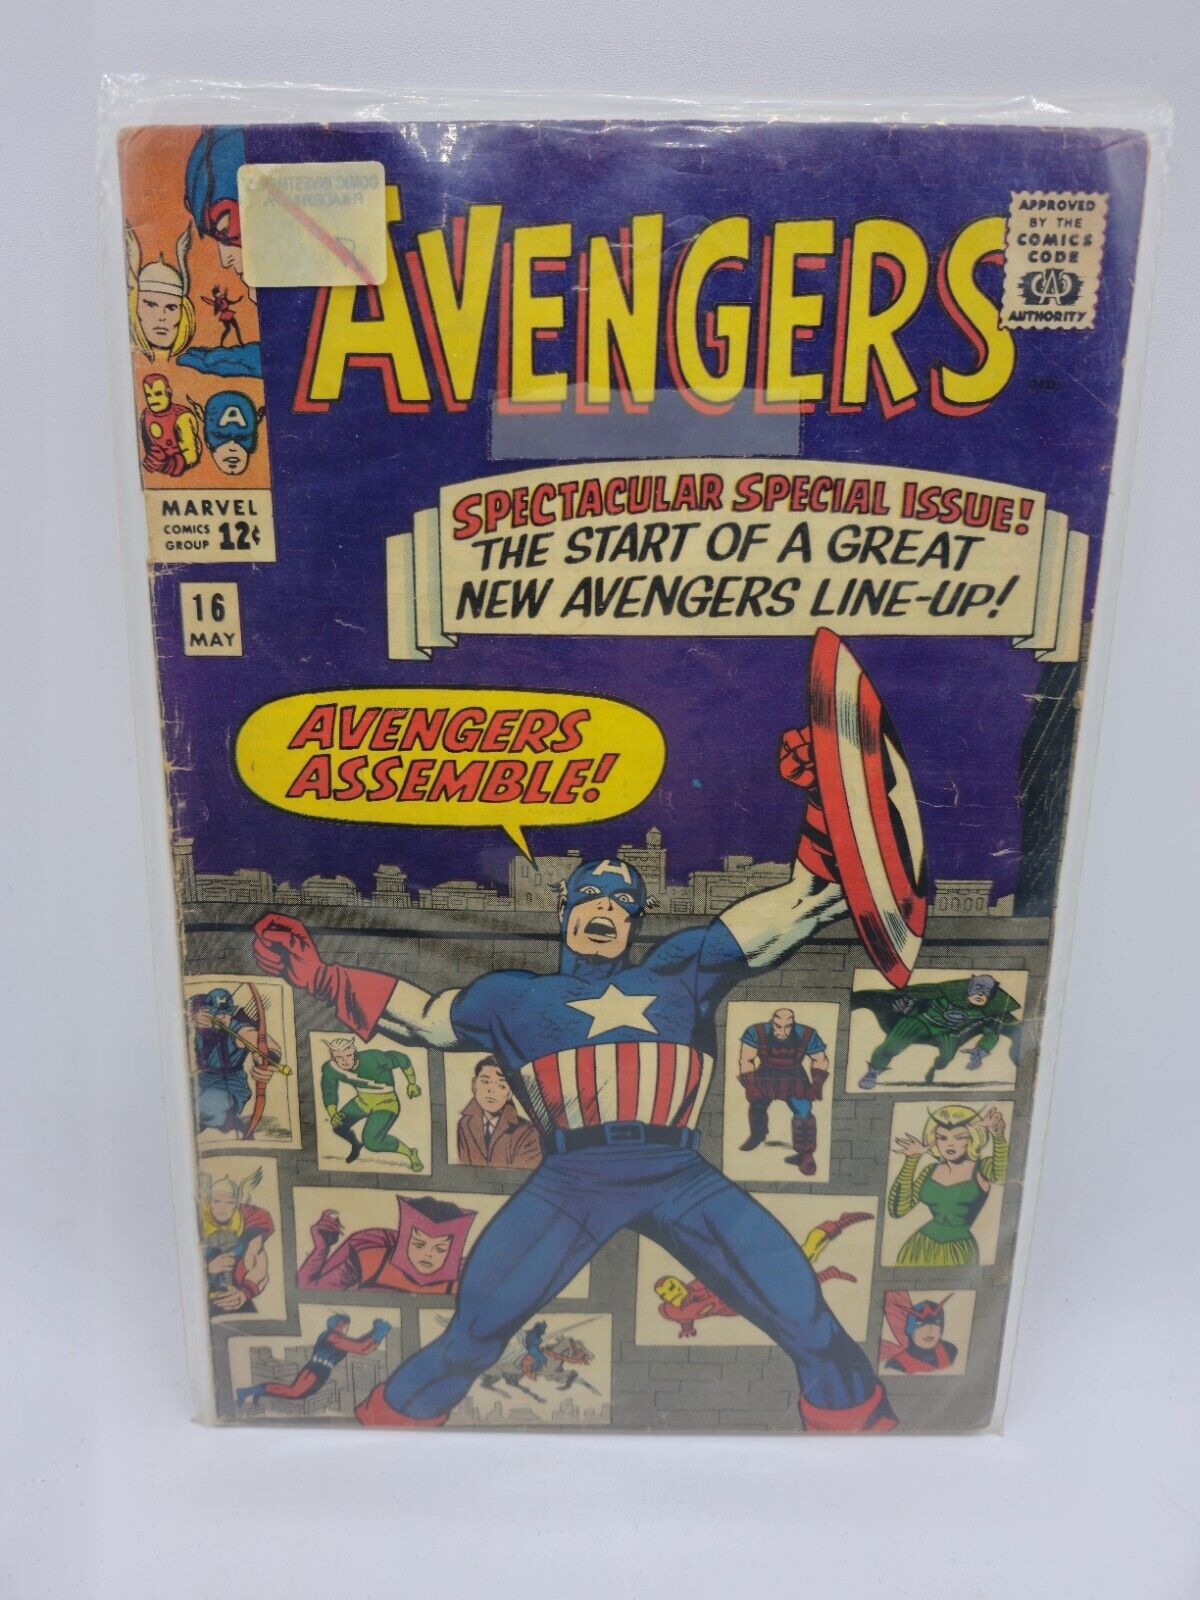 The AVENGERS #16 1965 1st Issue New Line-up Marvel Silver Age Comics Key 